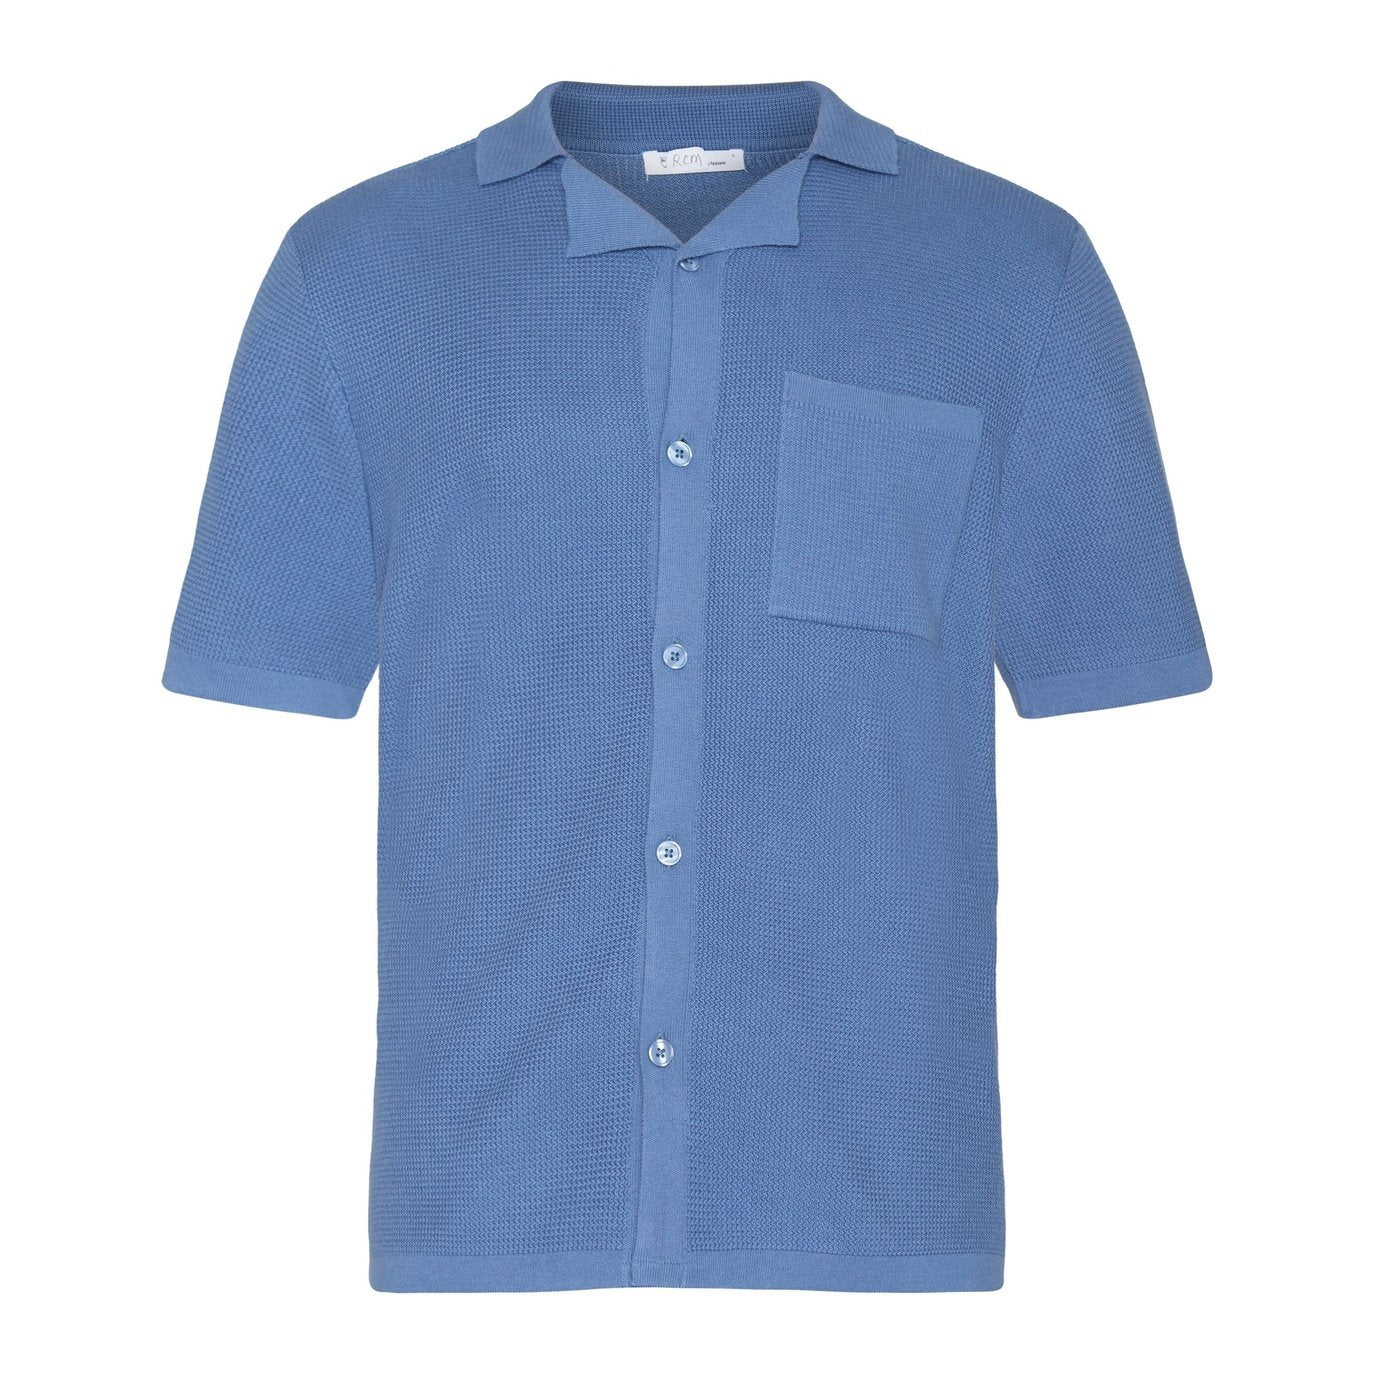 Knowledge Cotton Apparel M Boxy Short Sleeve Structured Knitted Shirt Moonlight Blue